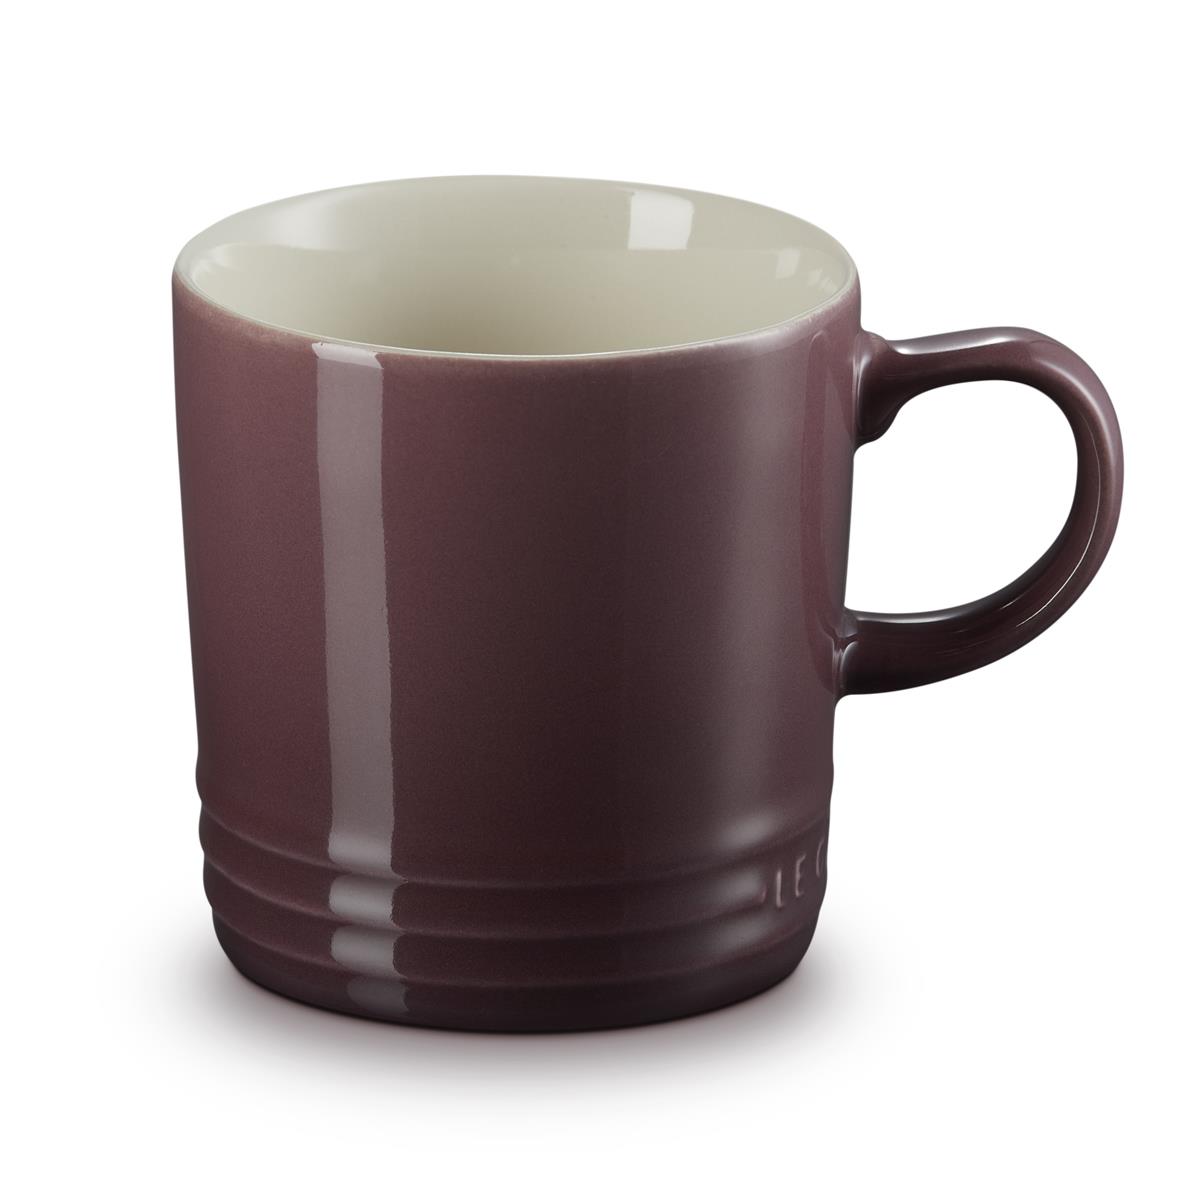 Do the mugs have a matt finish on the exterior?